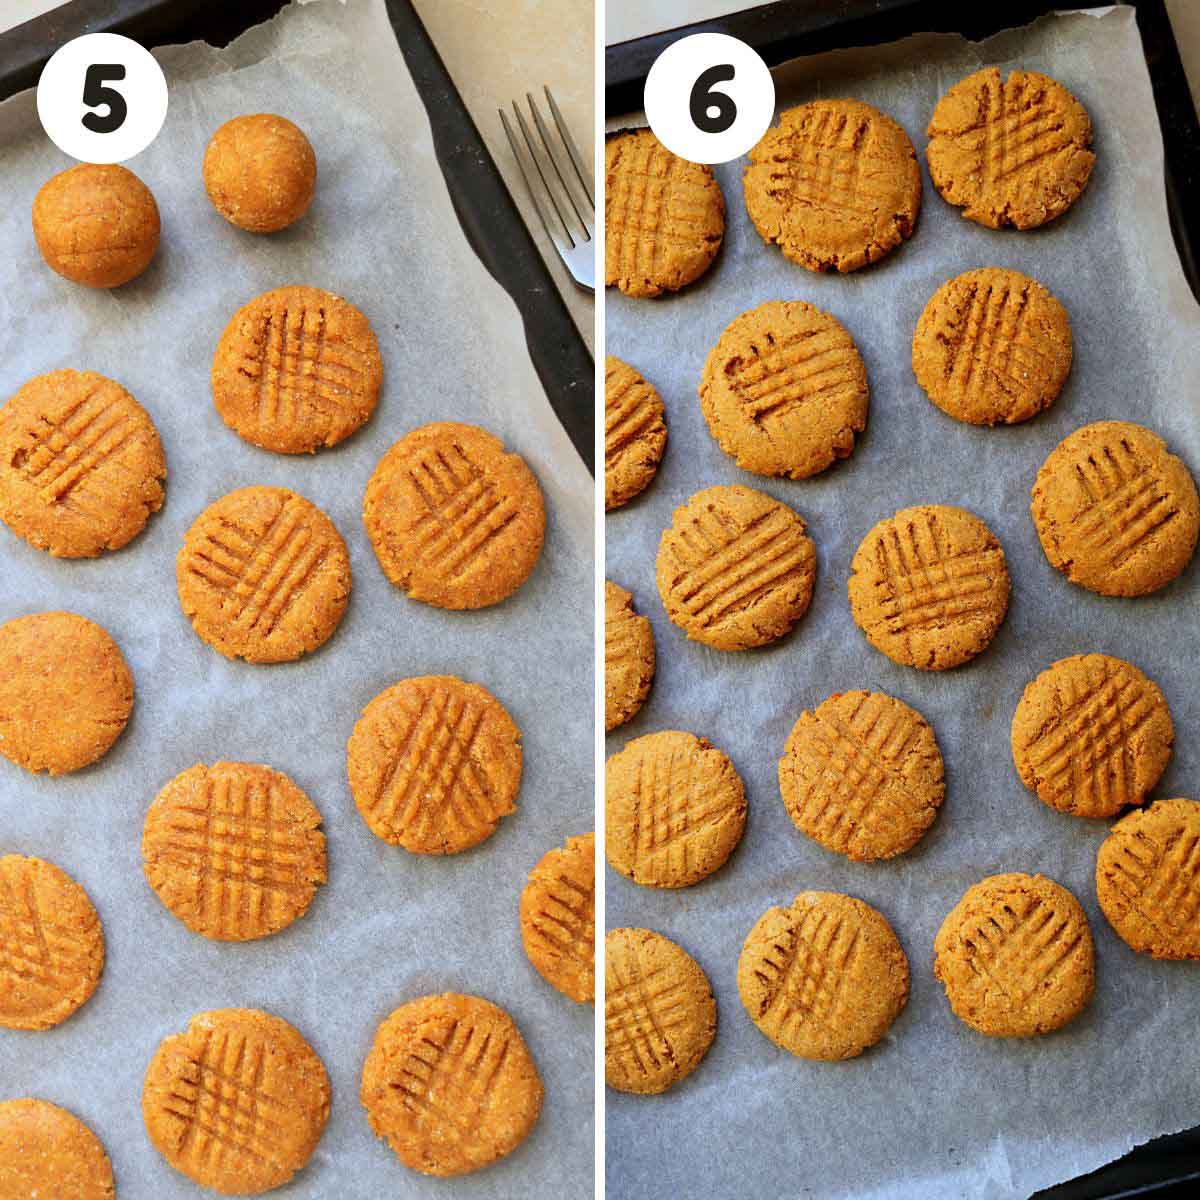 Steps to bake the peanut butter cookies.